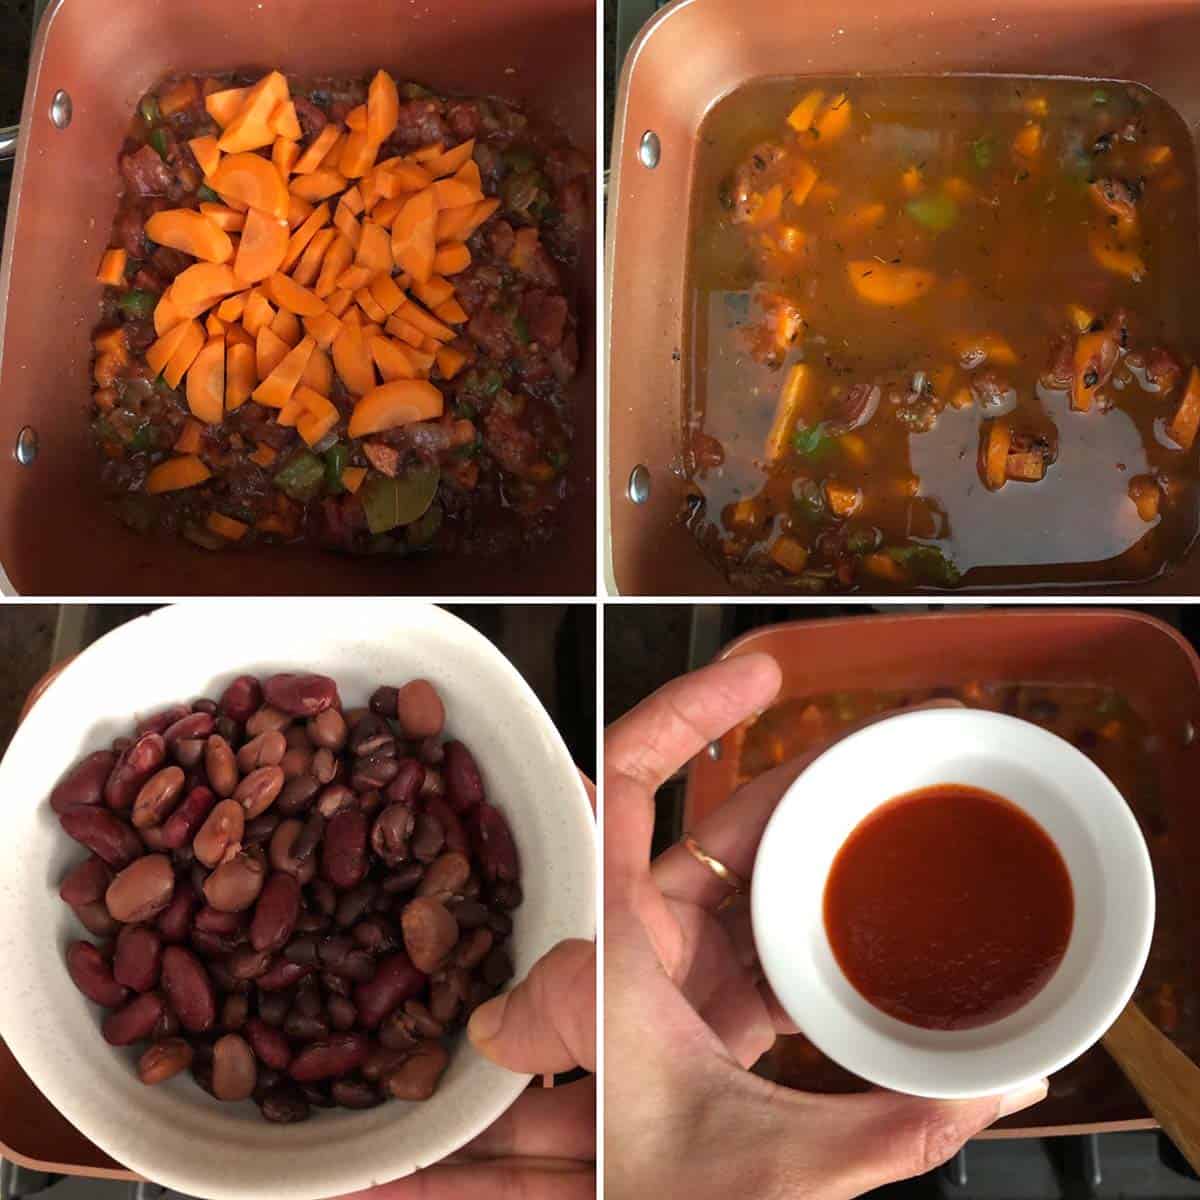 4 panel photo showing the addition of carrots, beans and hot sauce to the pan.